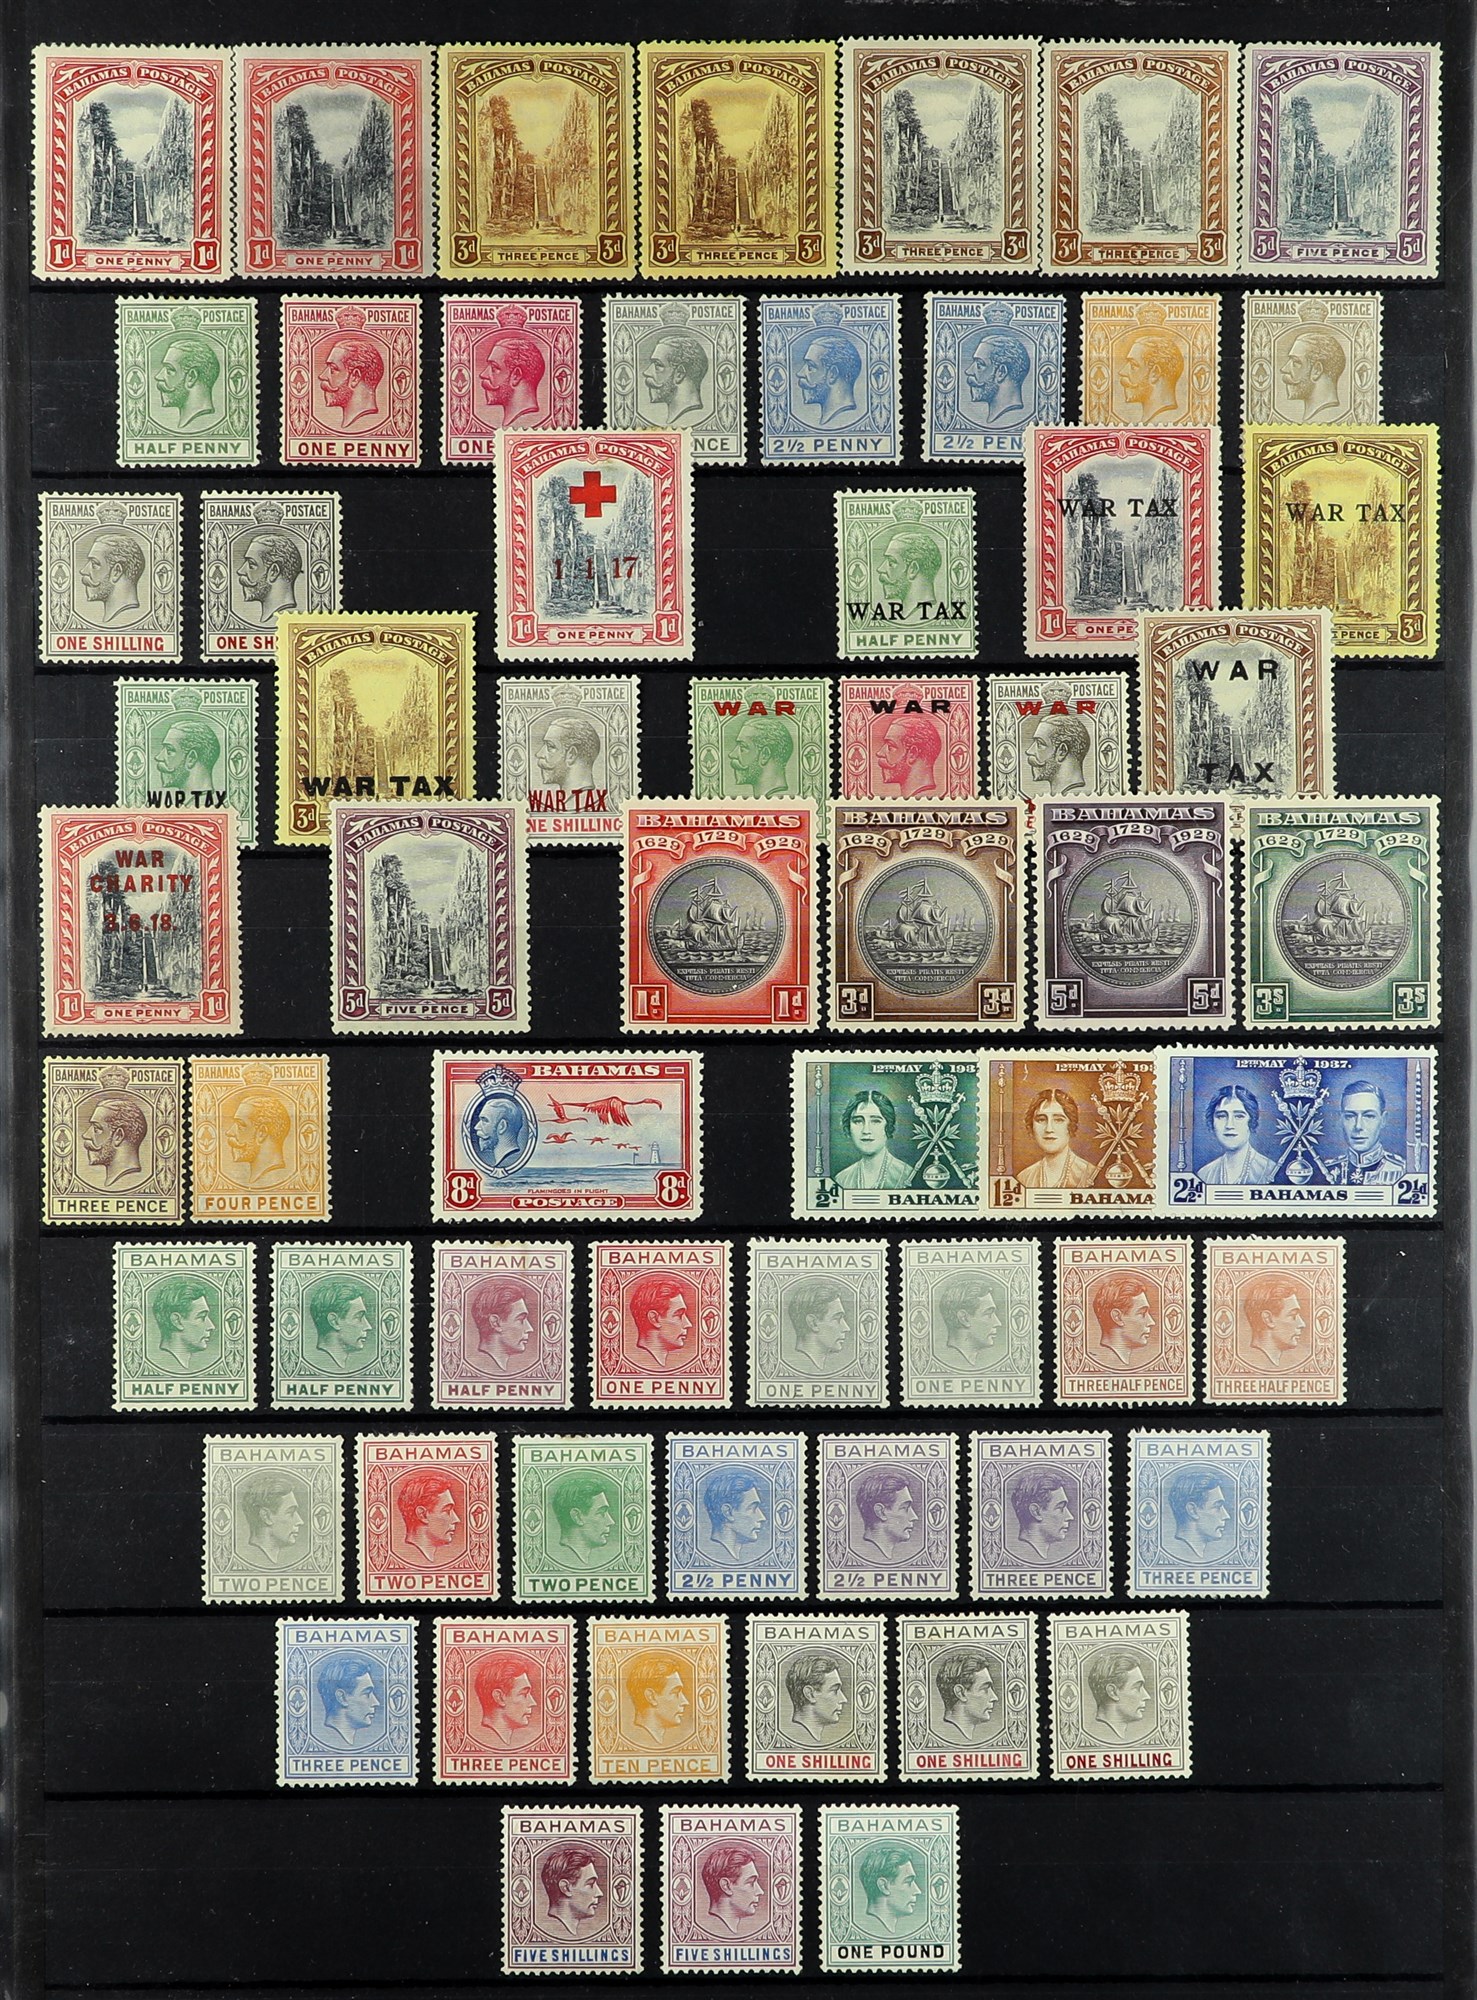 BAHAMAS 1911 - 1952 COLLECTION of 64 mint stamps on a protective page, includes the 1930